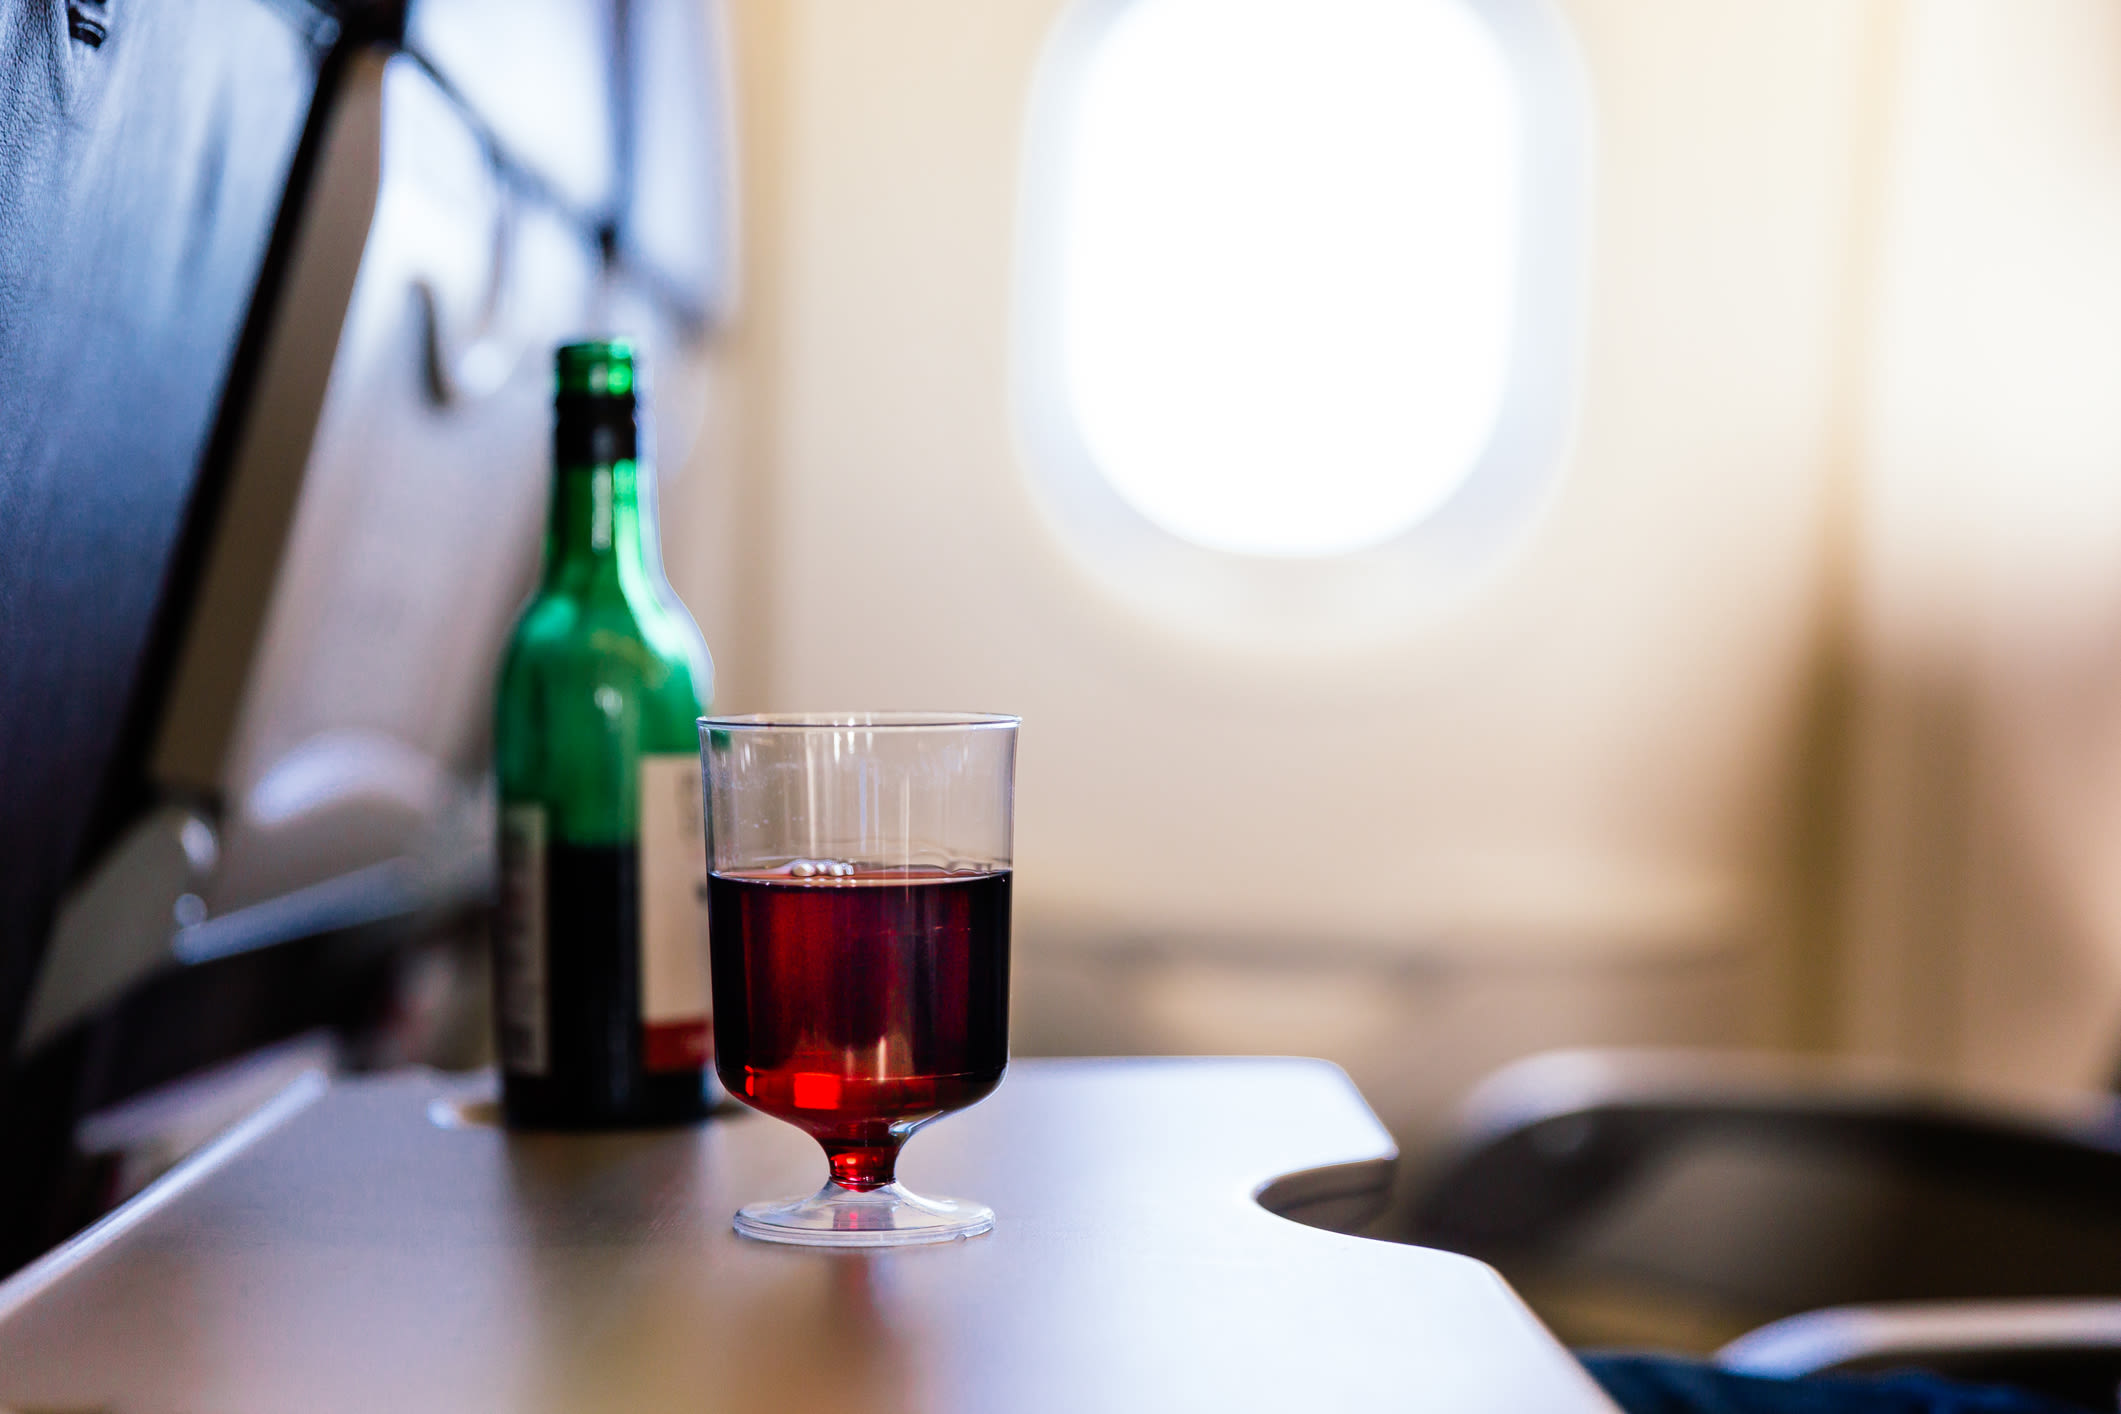 Drinking On Planes Could Be Bad For You, New Study Finds